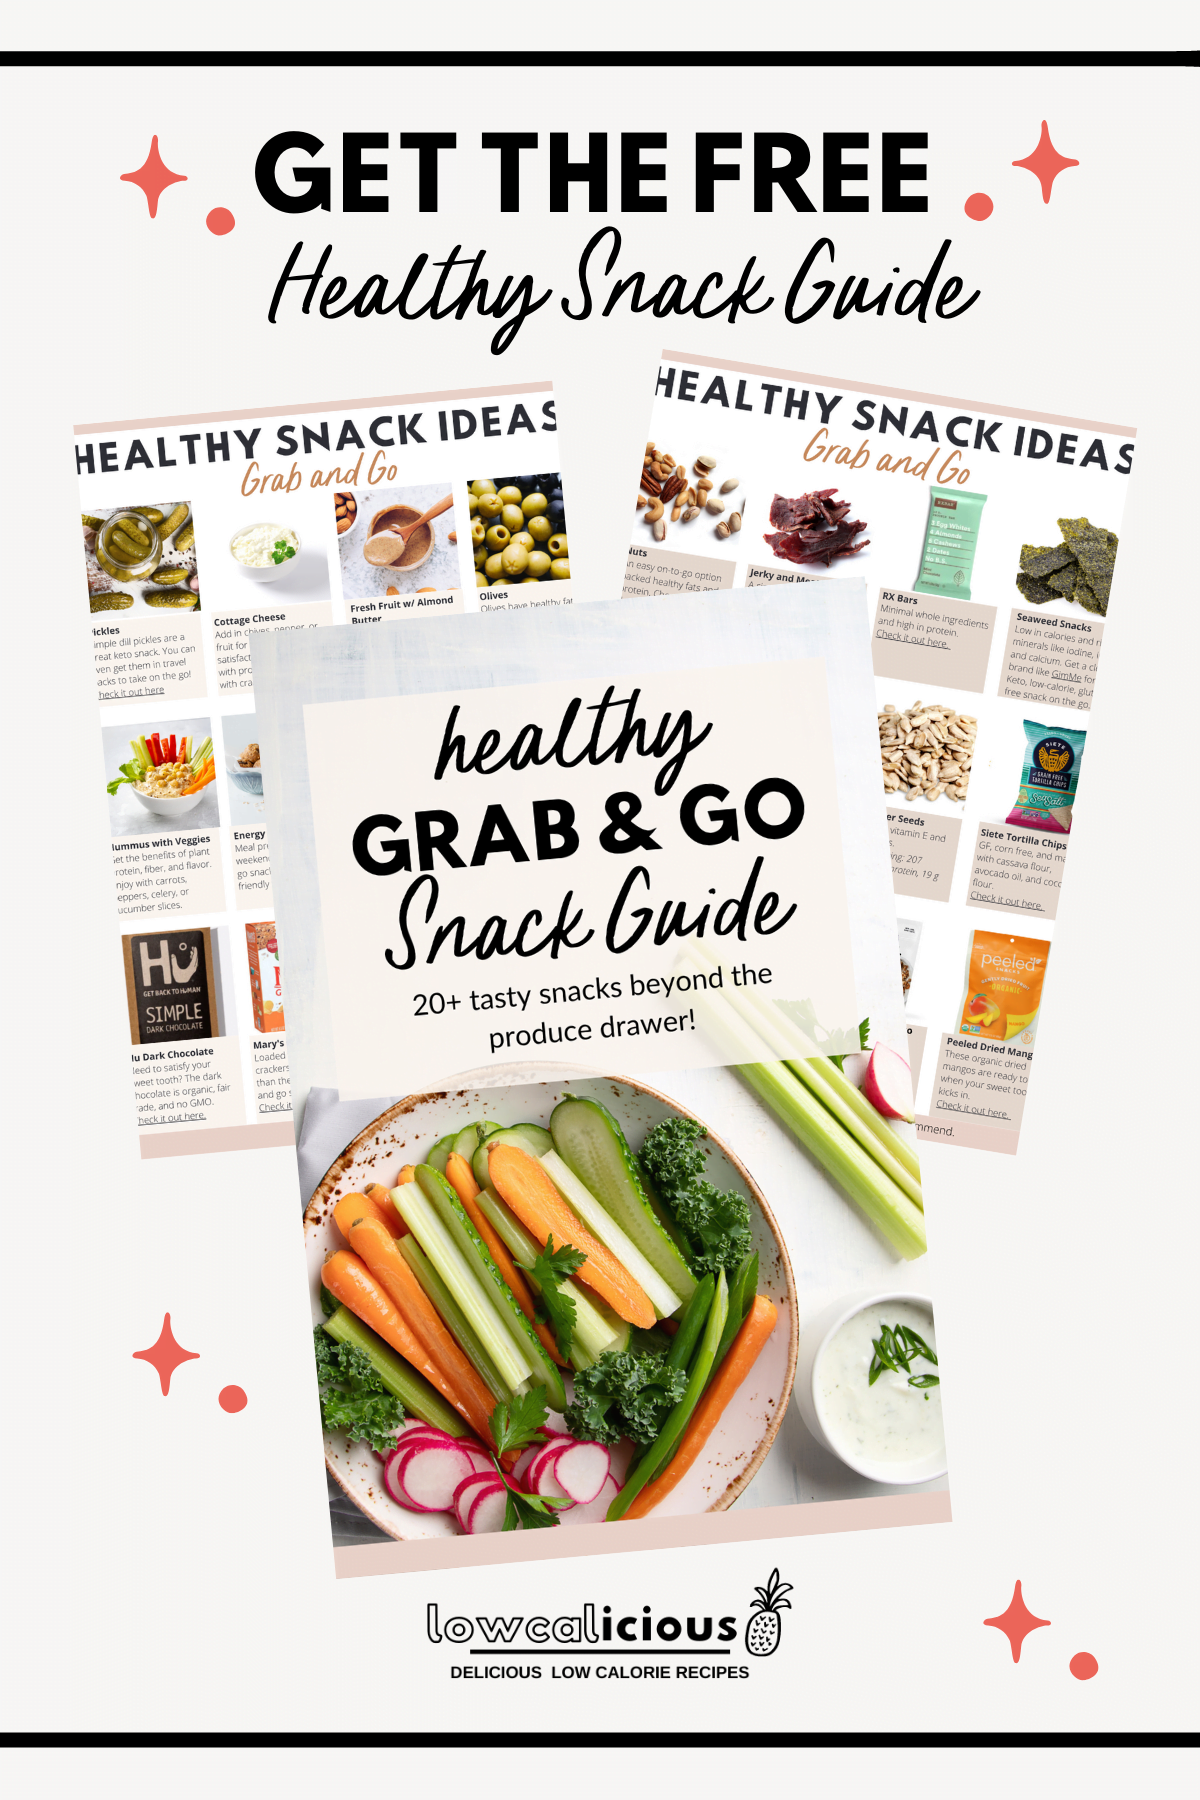 Image of 3 pdf pages for the Free Healthy Snack Guide email sign up form